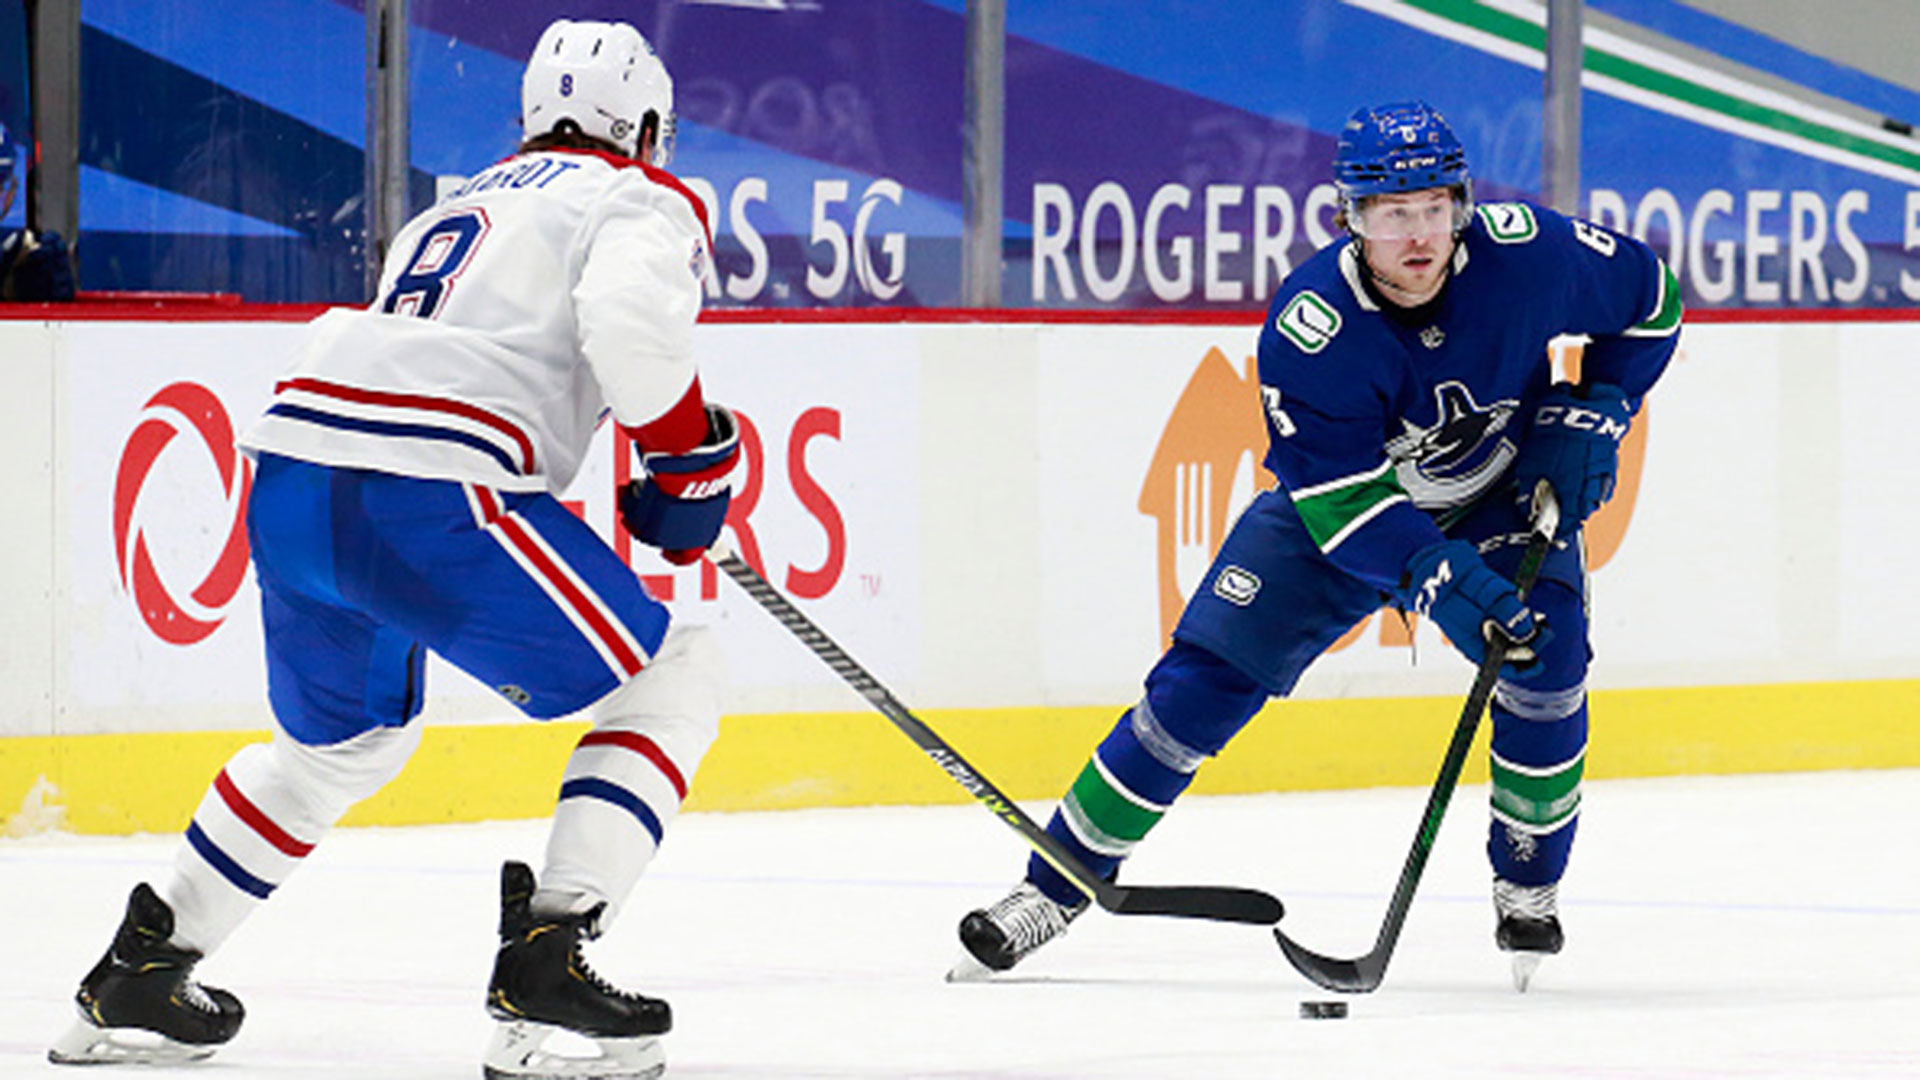 Why the Canucks vs. Habs game is a good destination for deadline shoppers